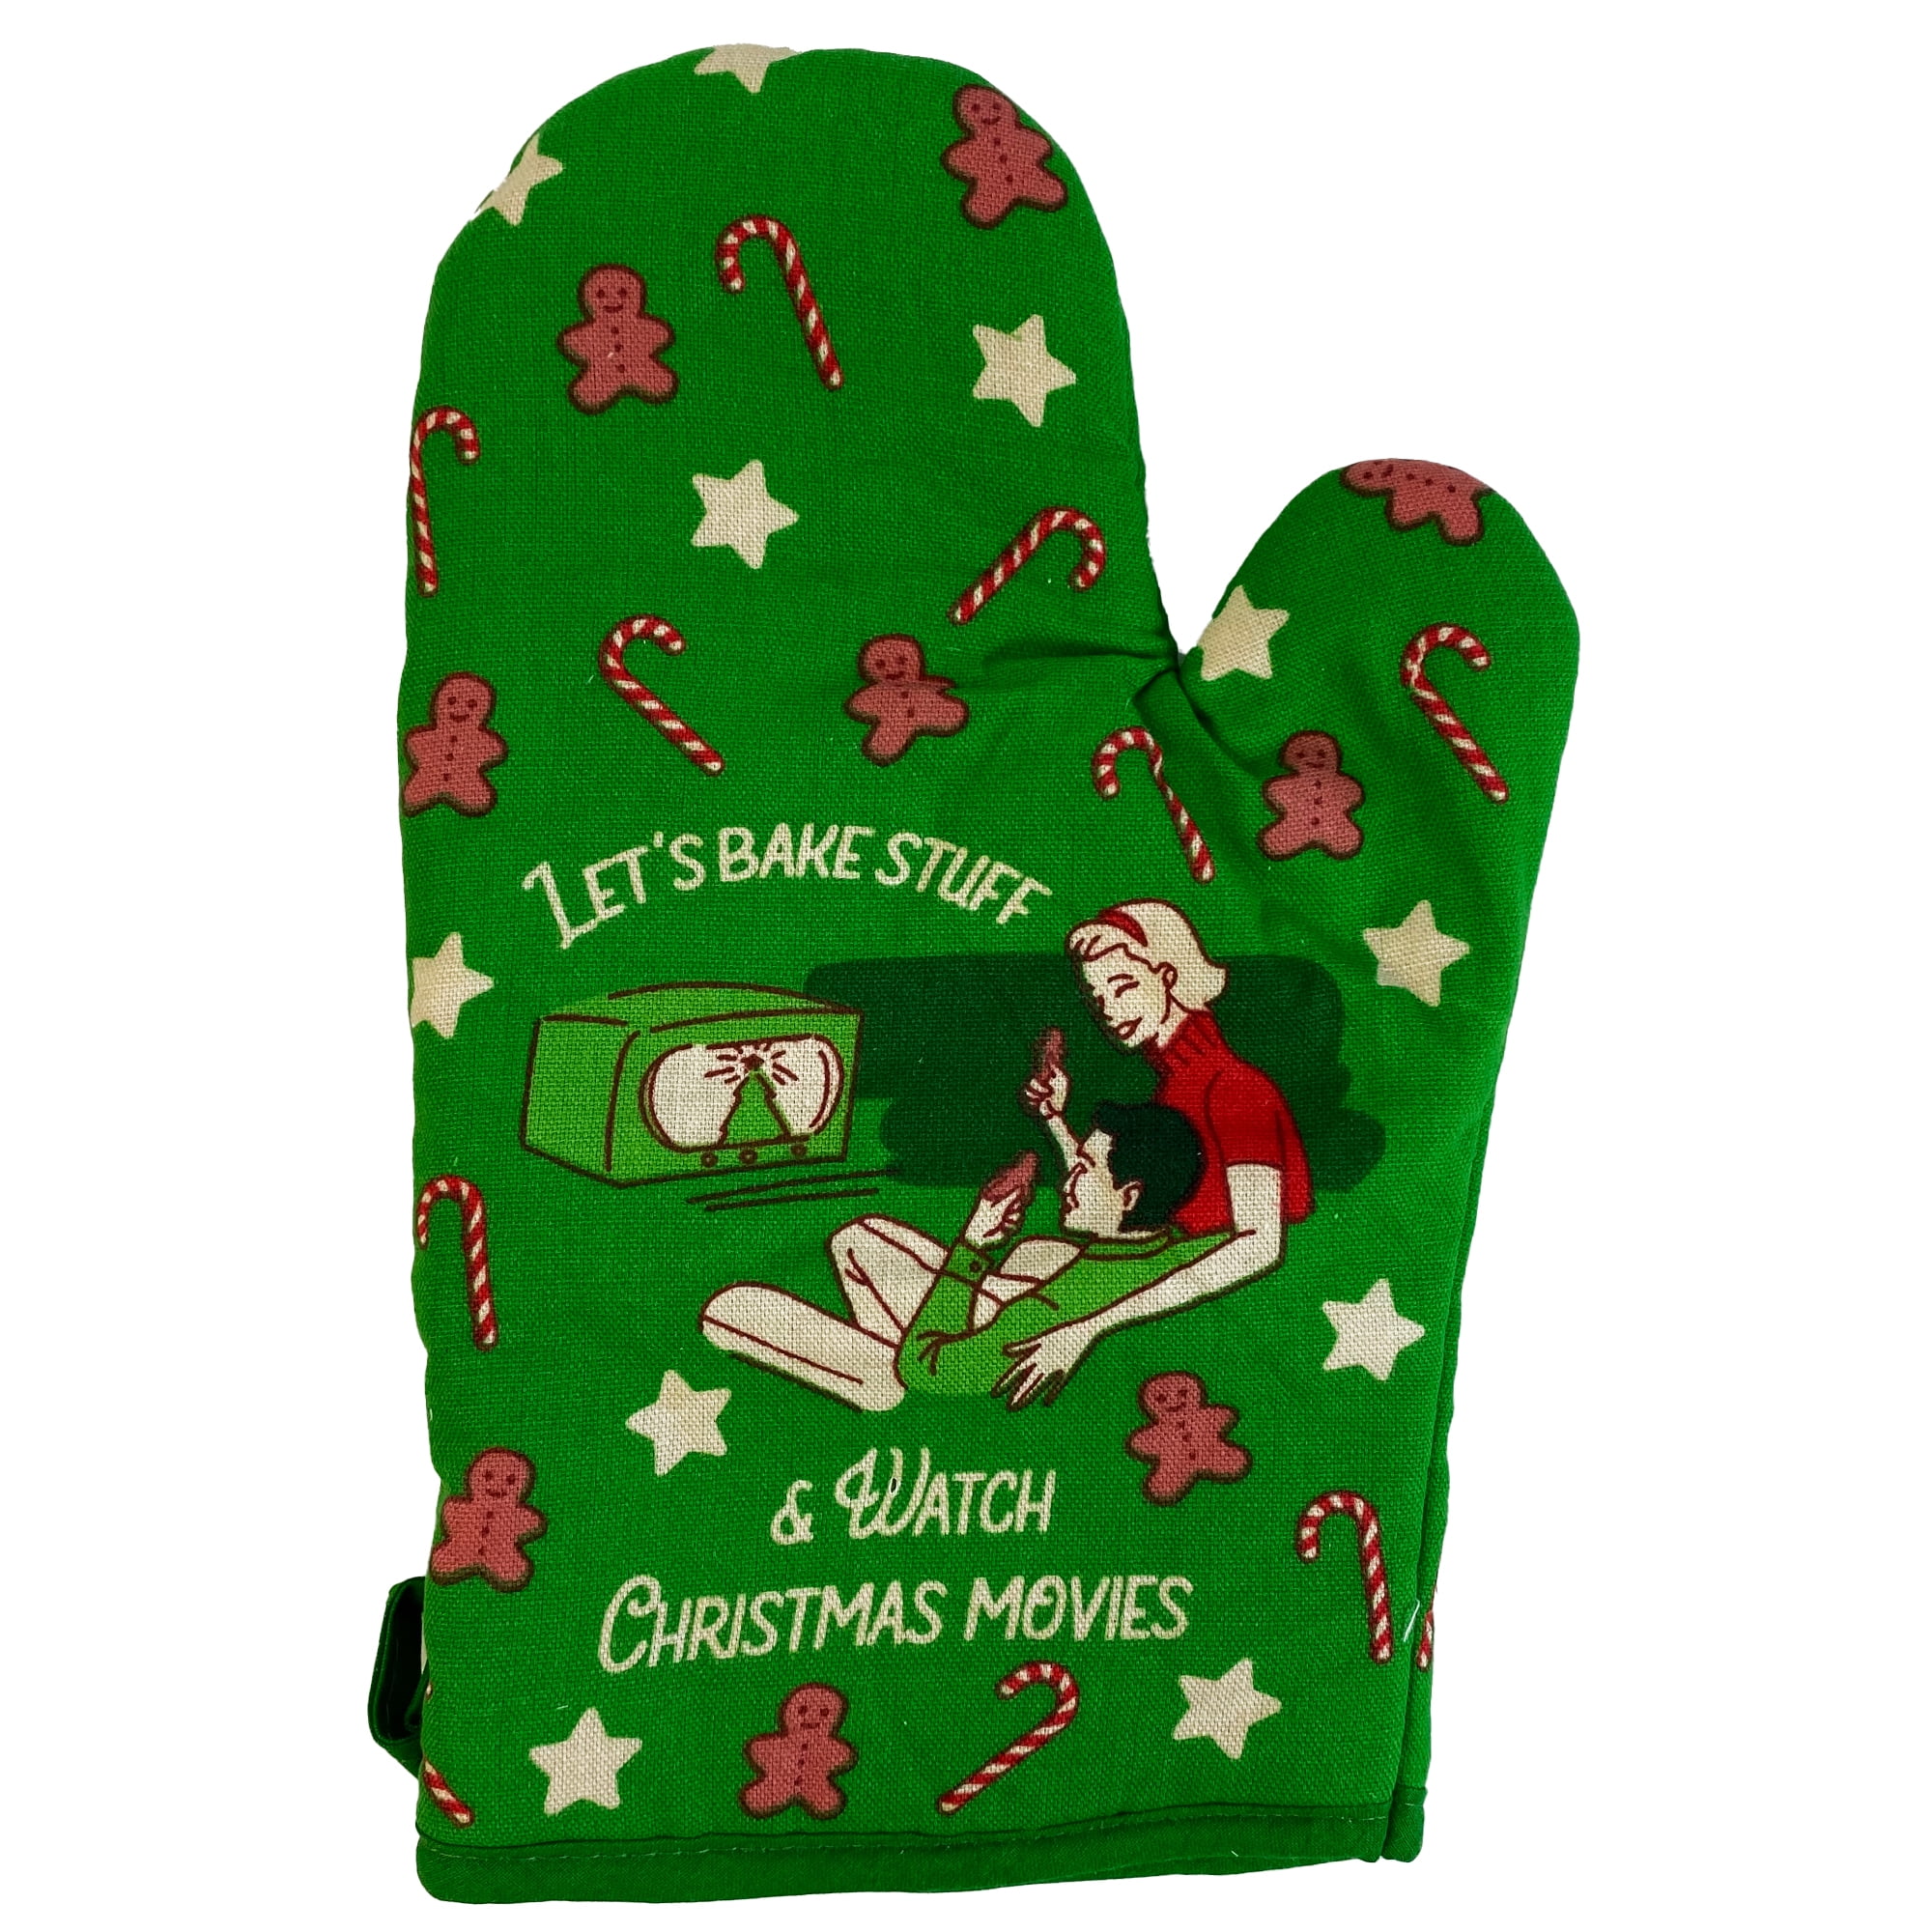 Funny Oven Mitts: 8 Best of 2021 for Mom & Grandma's House